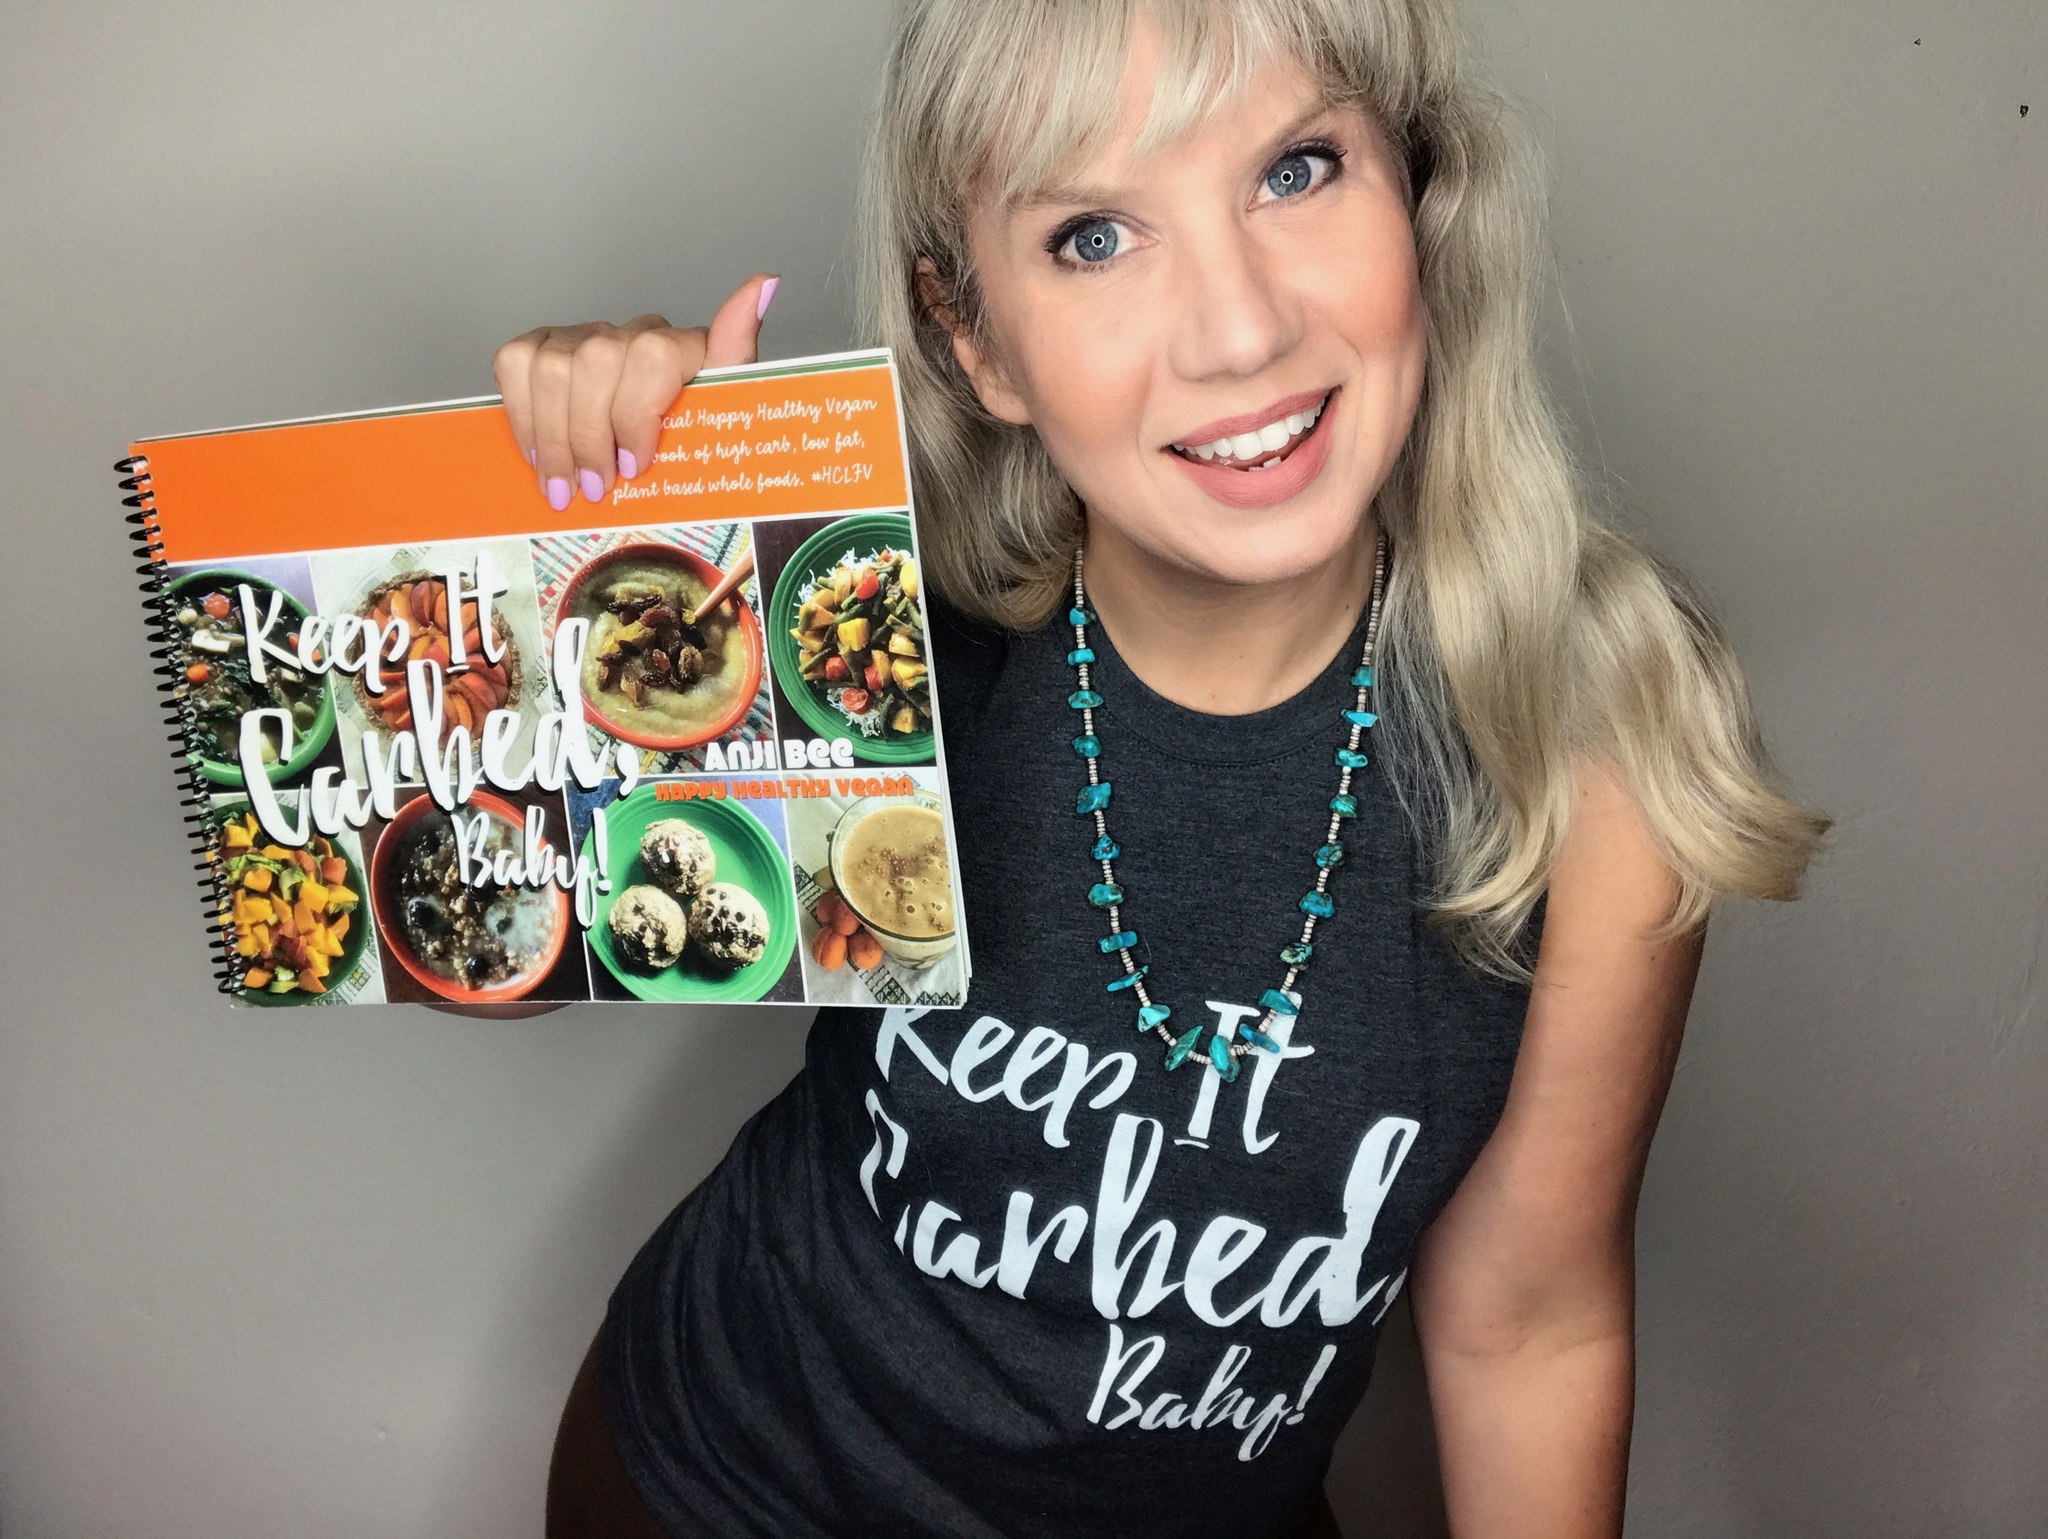 Keep It Carbed, Baby! Cookbook Out Now!